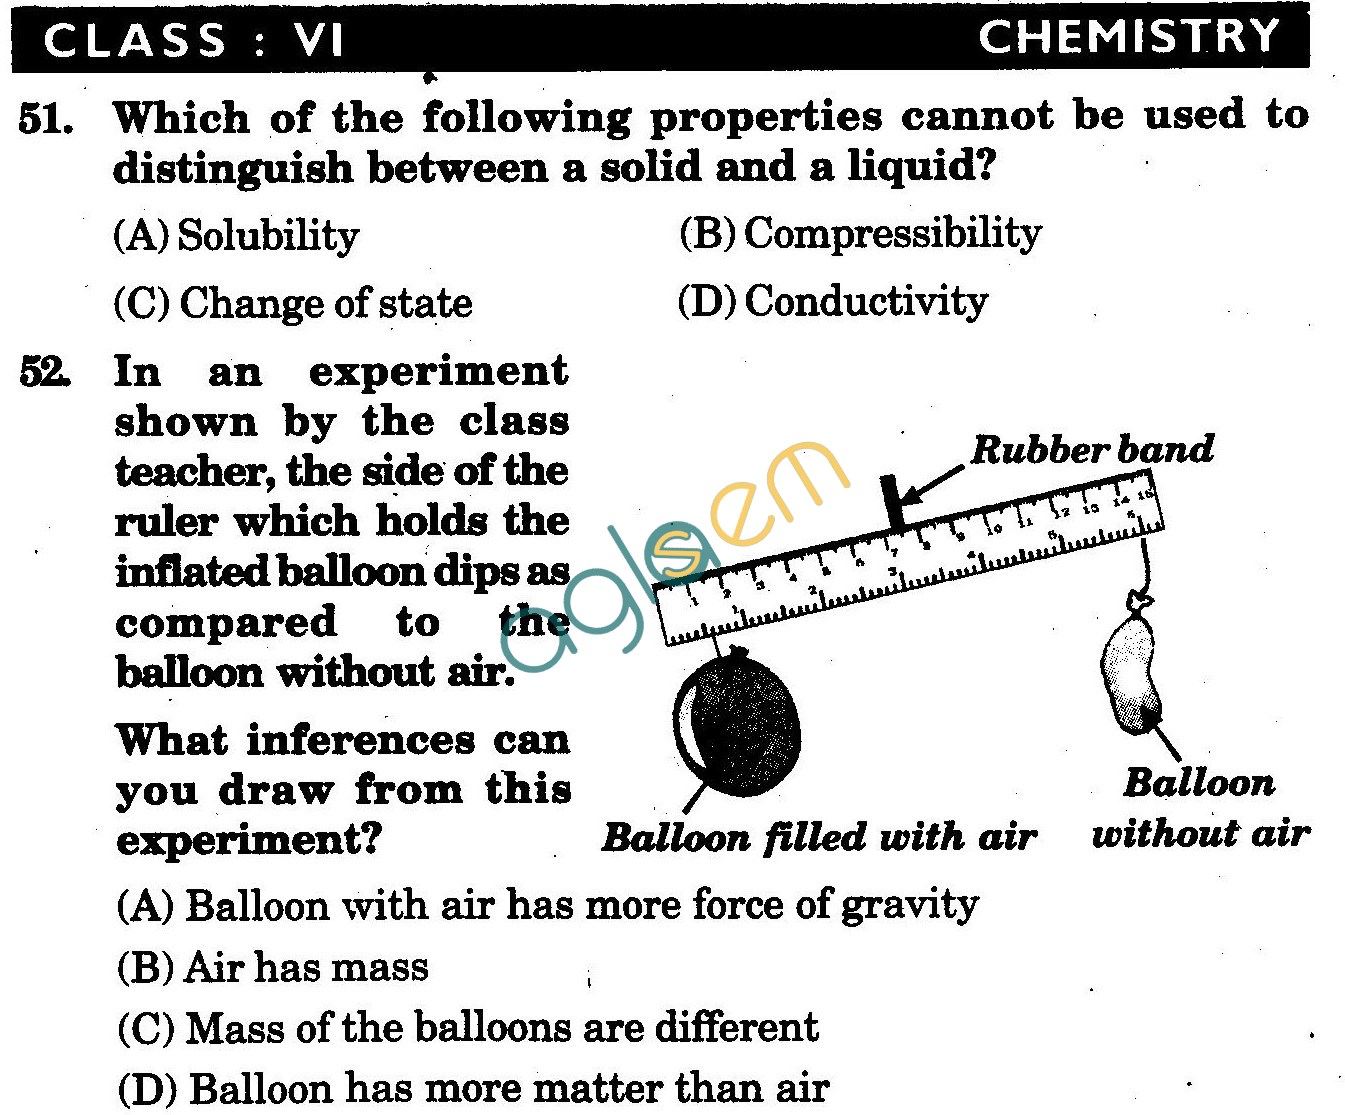 NSTSE 2009 Class VI Question Paper with Answers - Chemistry